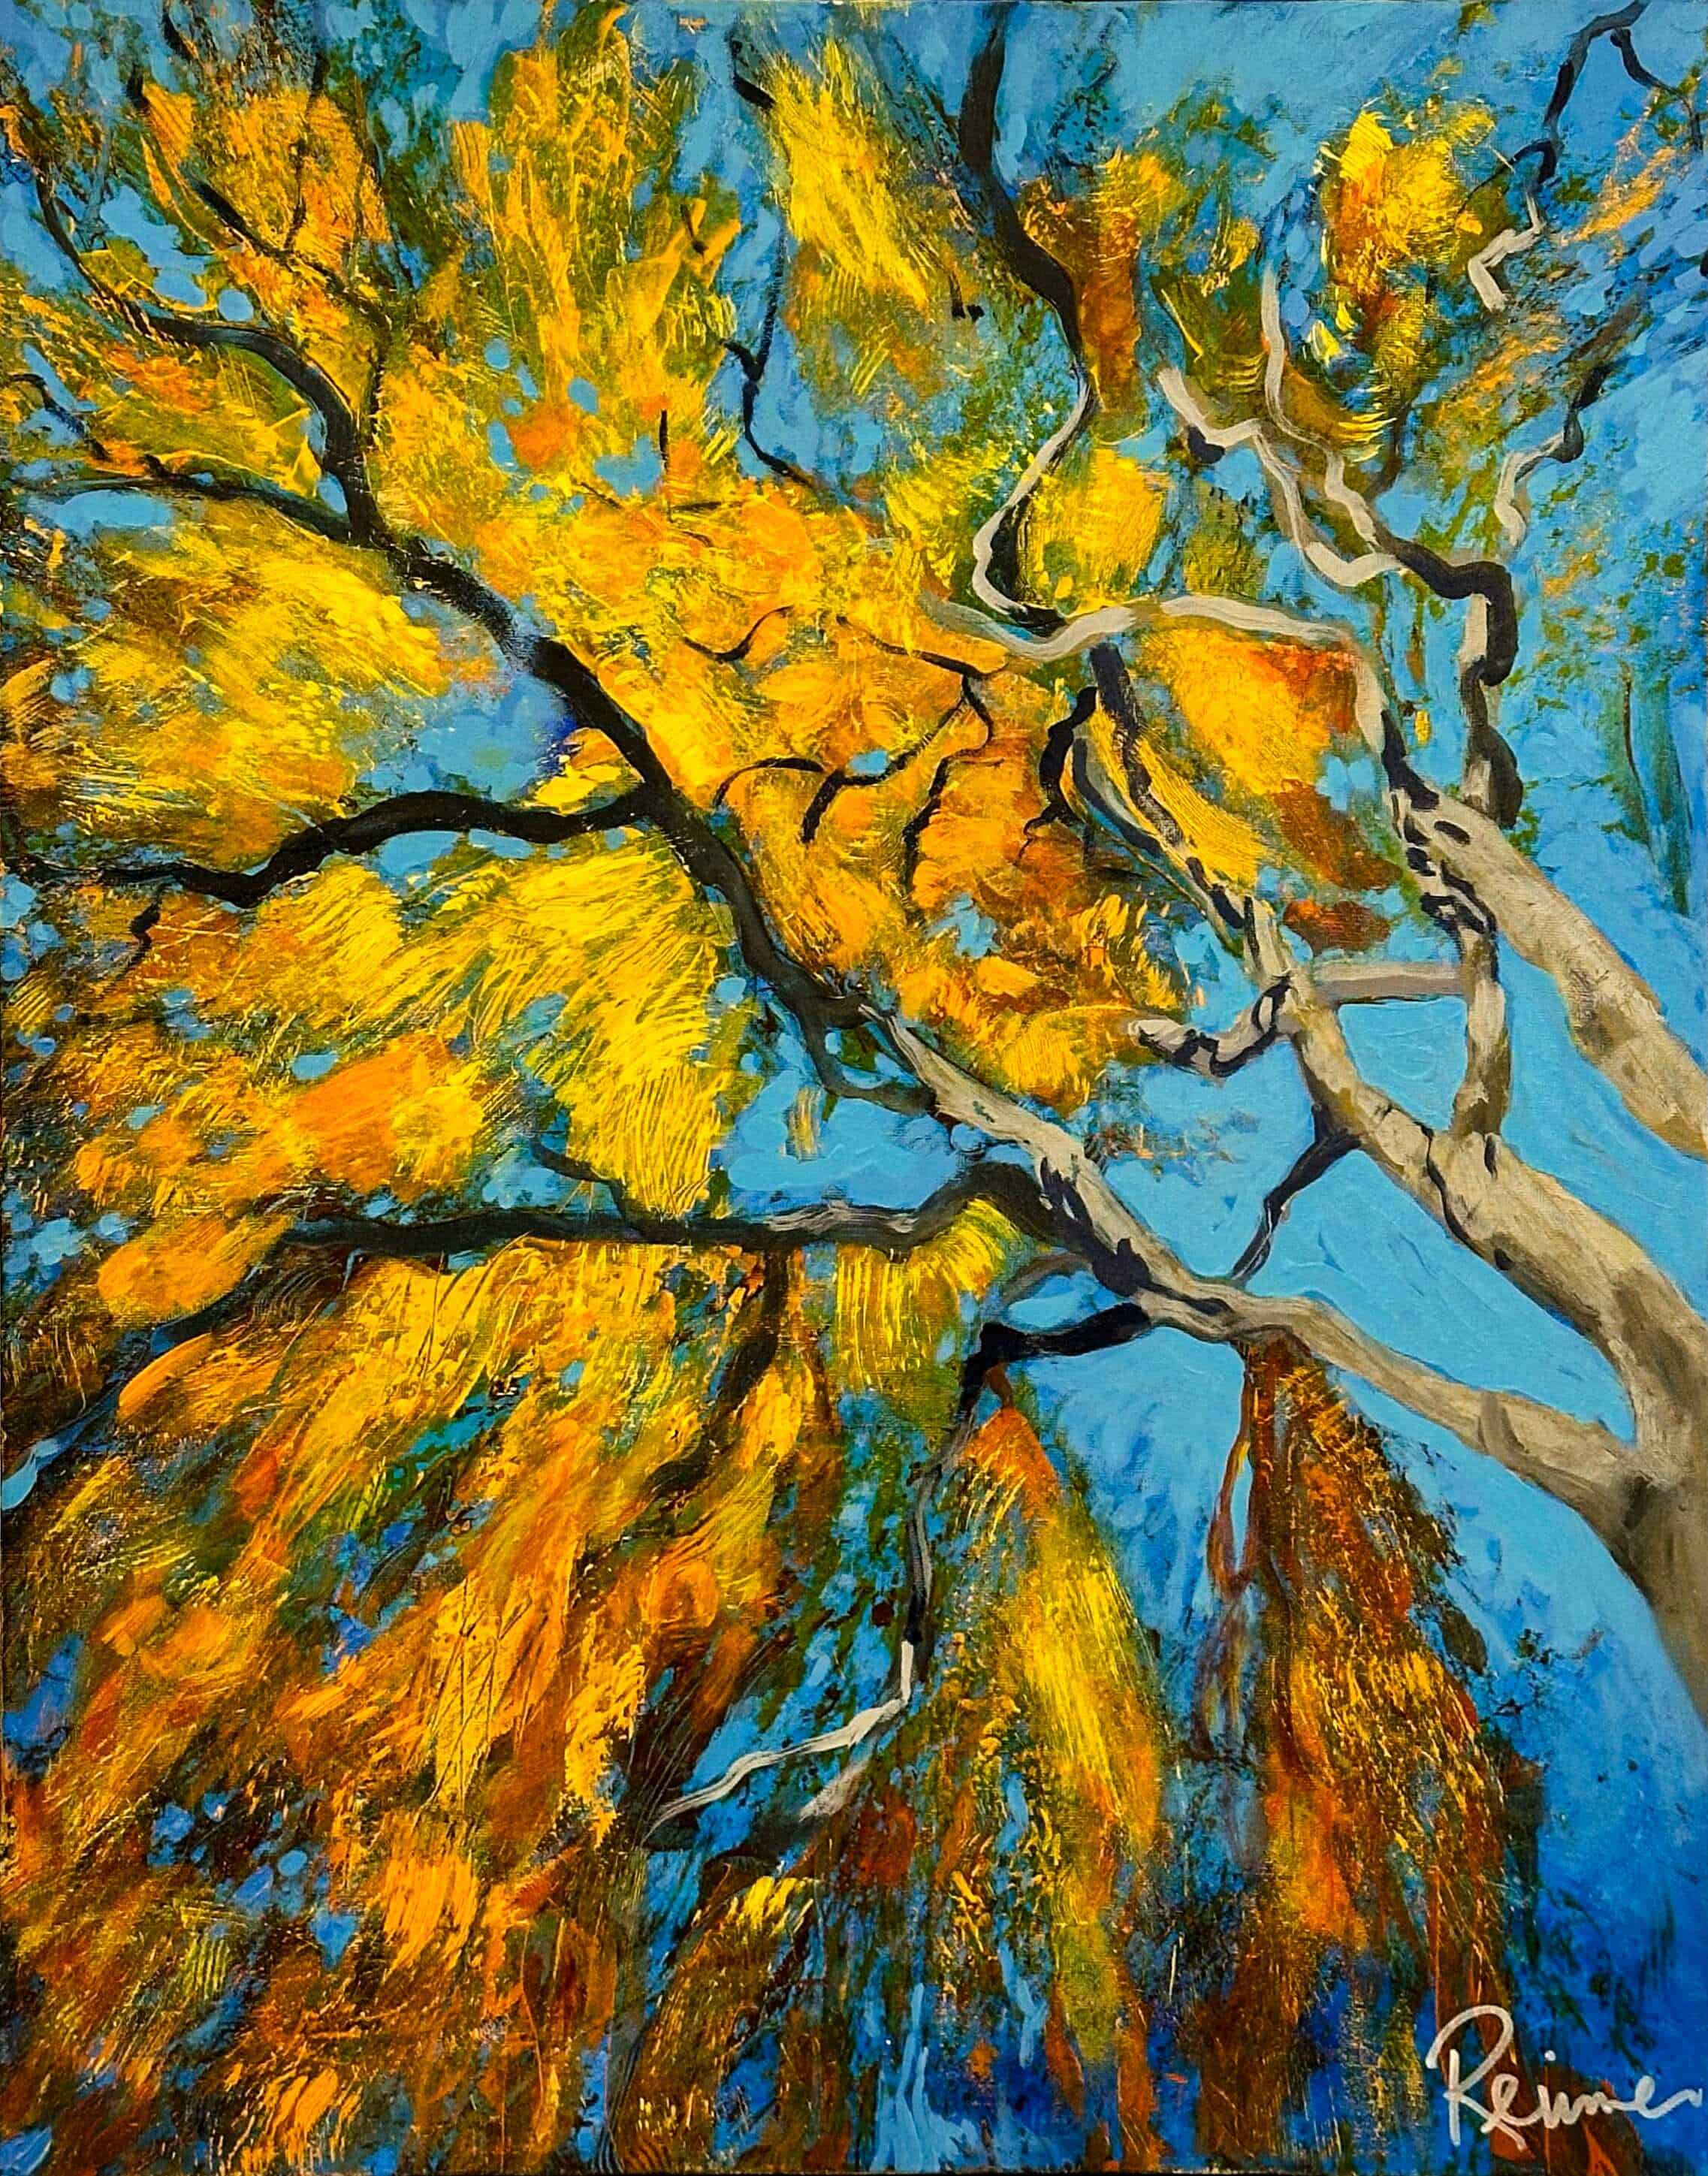 Abstract Art. Title: Bright Canopy, Acrylic on Canvas, 28x22 in by Contemporary Canadian Artist Christine Reimer.